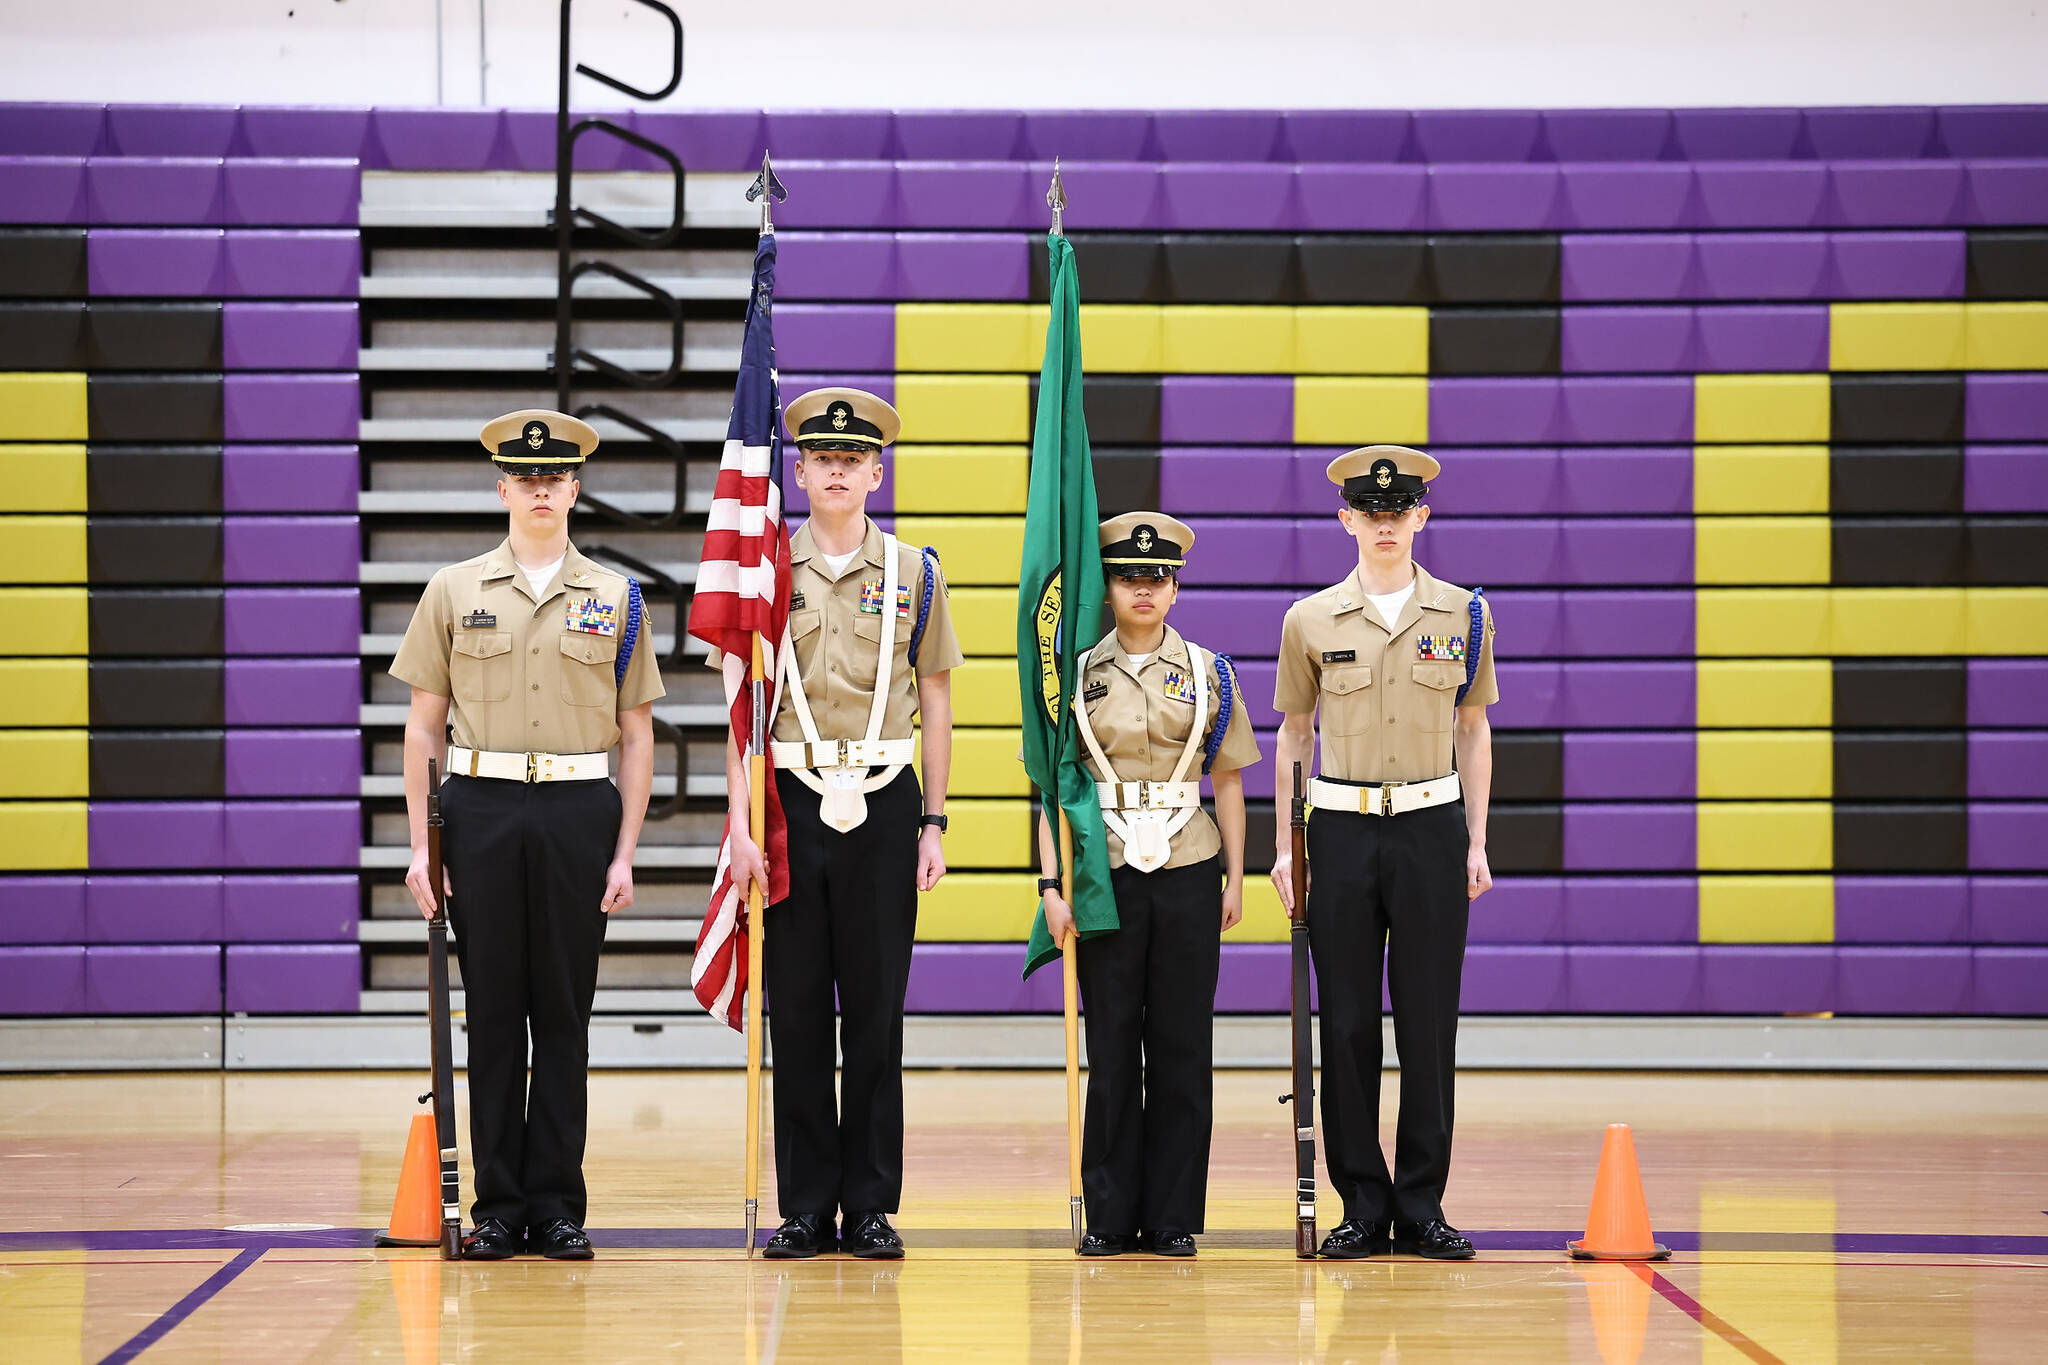 Oak Harbor’s Color Guard Team 2 are, from left, Caden Guy, Theron Hull-Walton, Khryza Castillo and Noah Smith. Guy won first place in the Armed Drill Team Commander and Castillo won first place in the Unarmed Drill Team Commander.